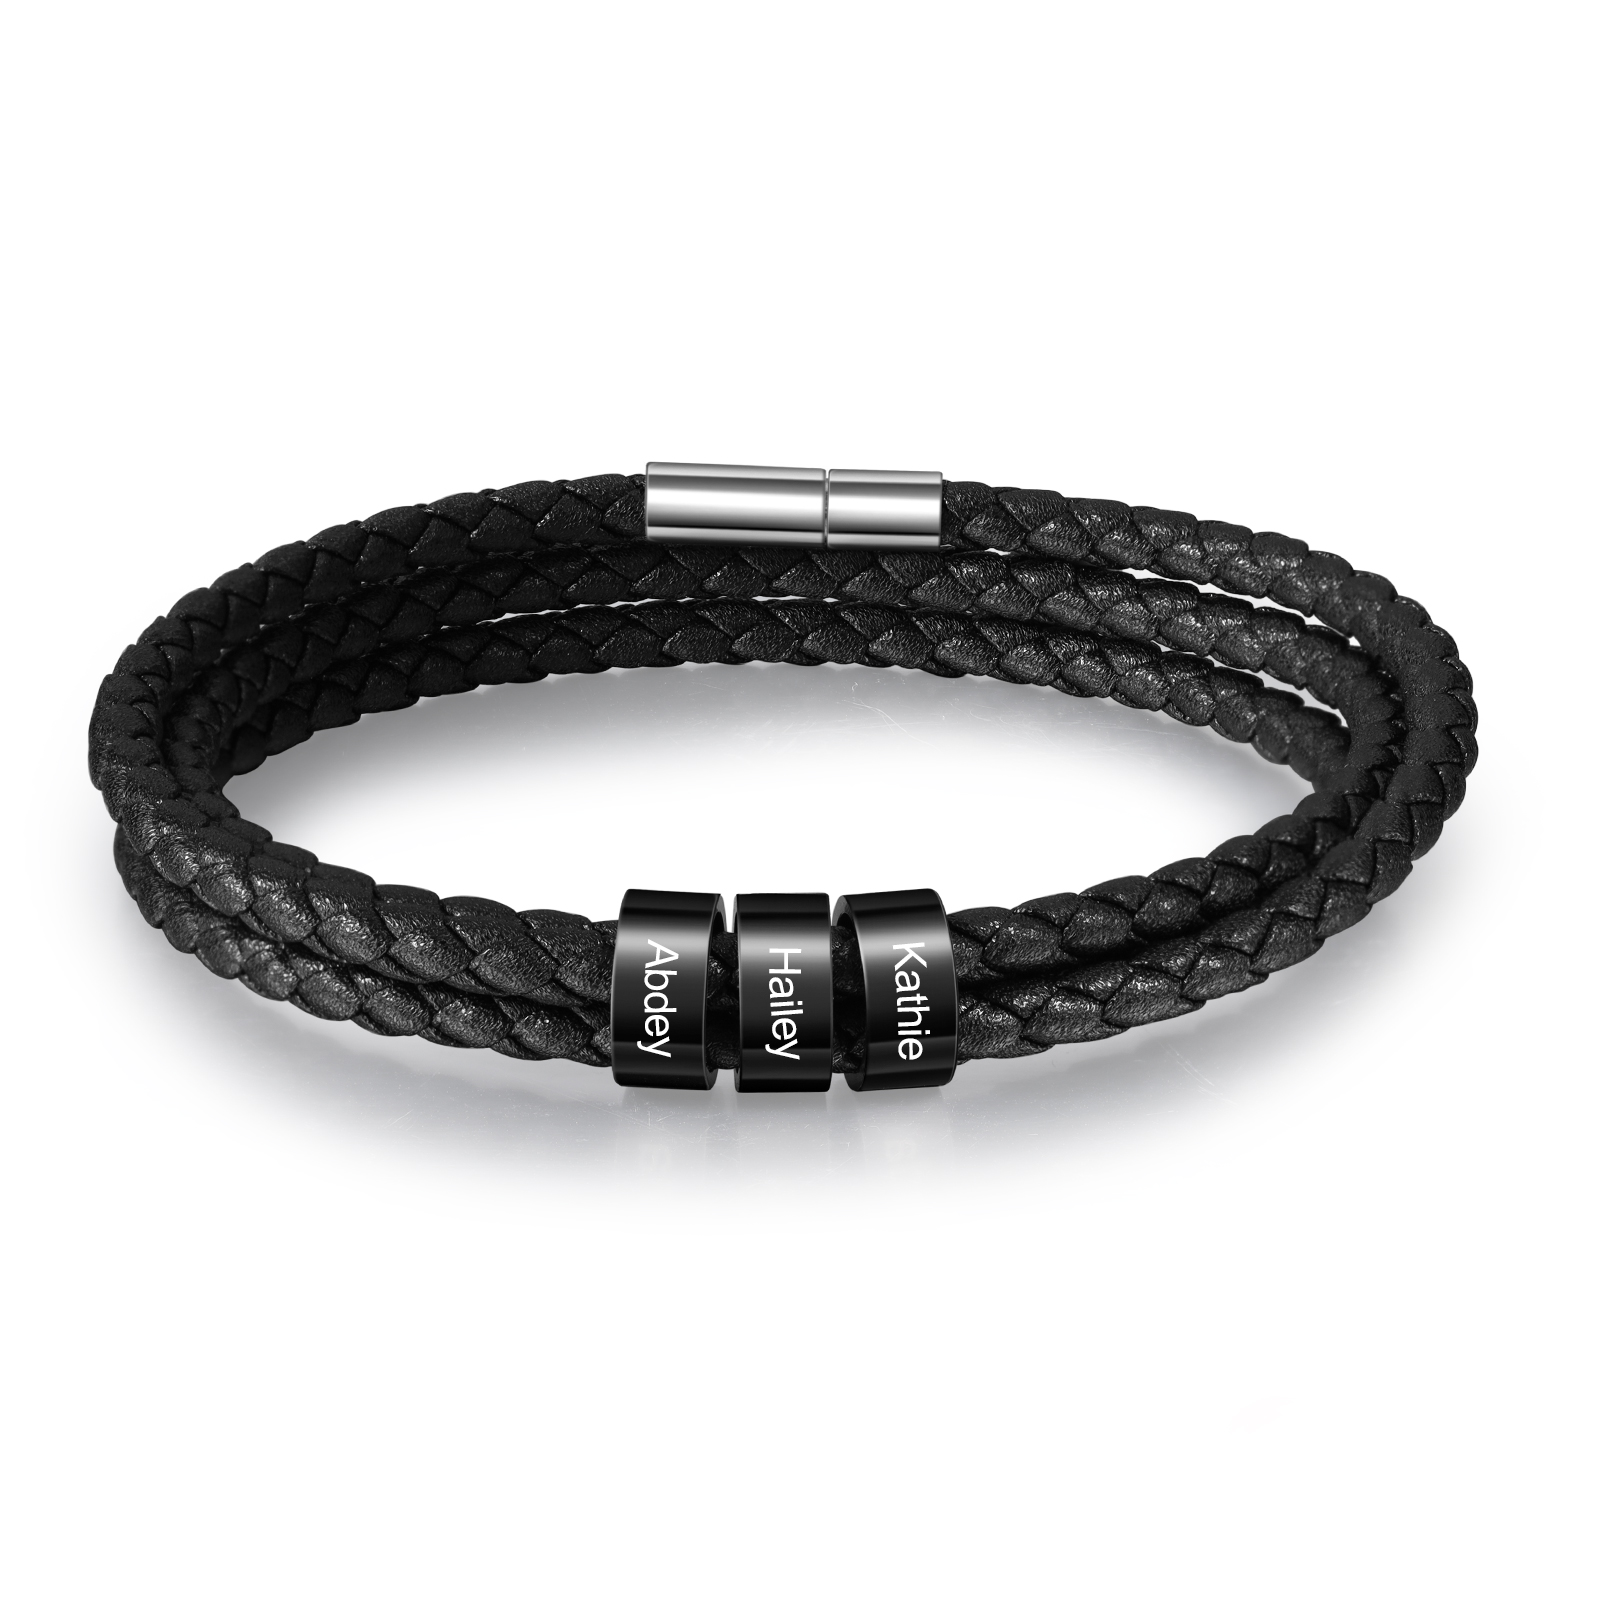 Father's Day Gift Men Braided Leather Bracelets with 3 Beads Bracelet Gifts for Him